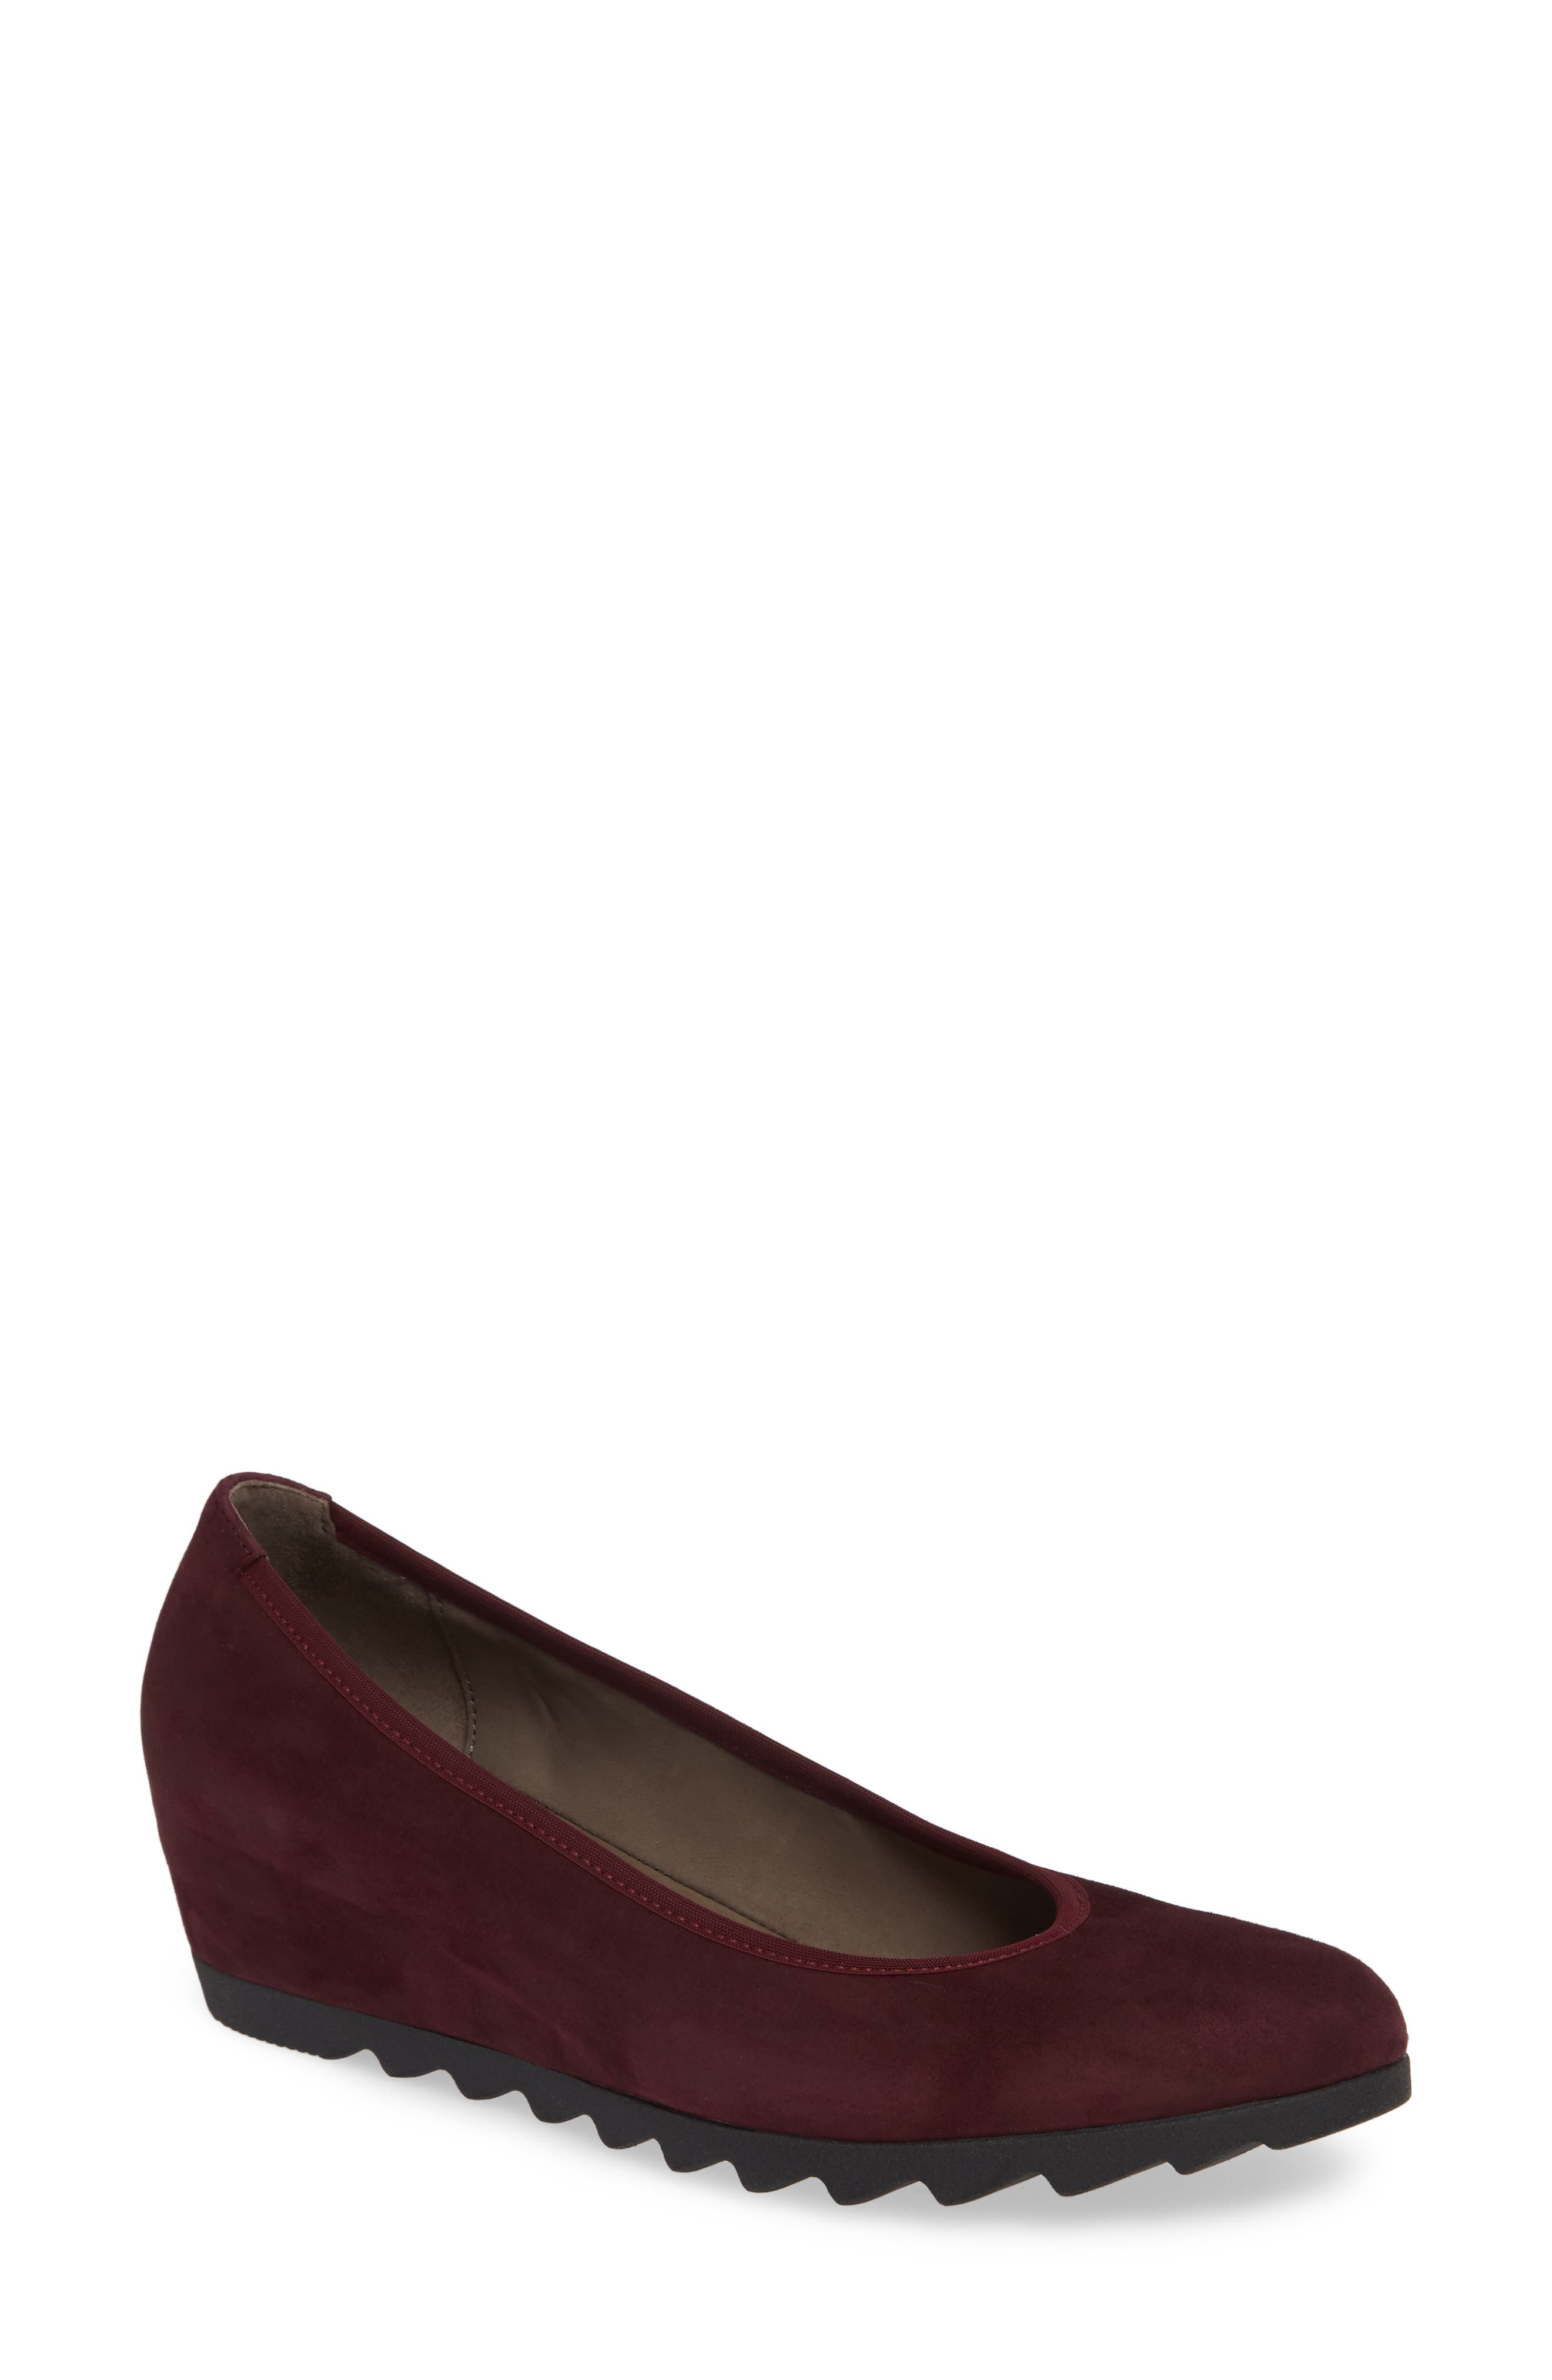 Women's Red Gabor Shoes | Nordstrom